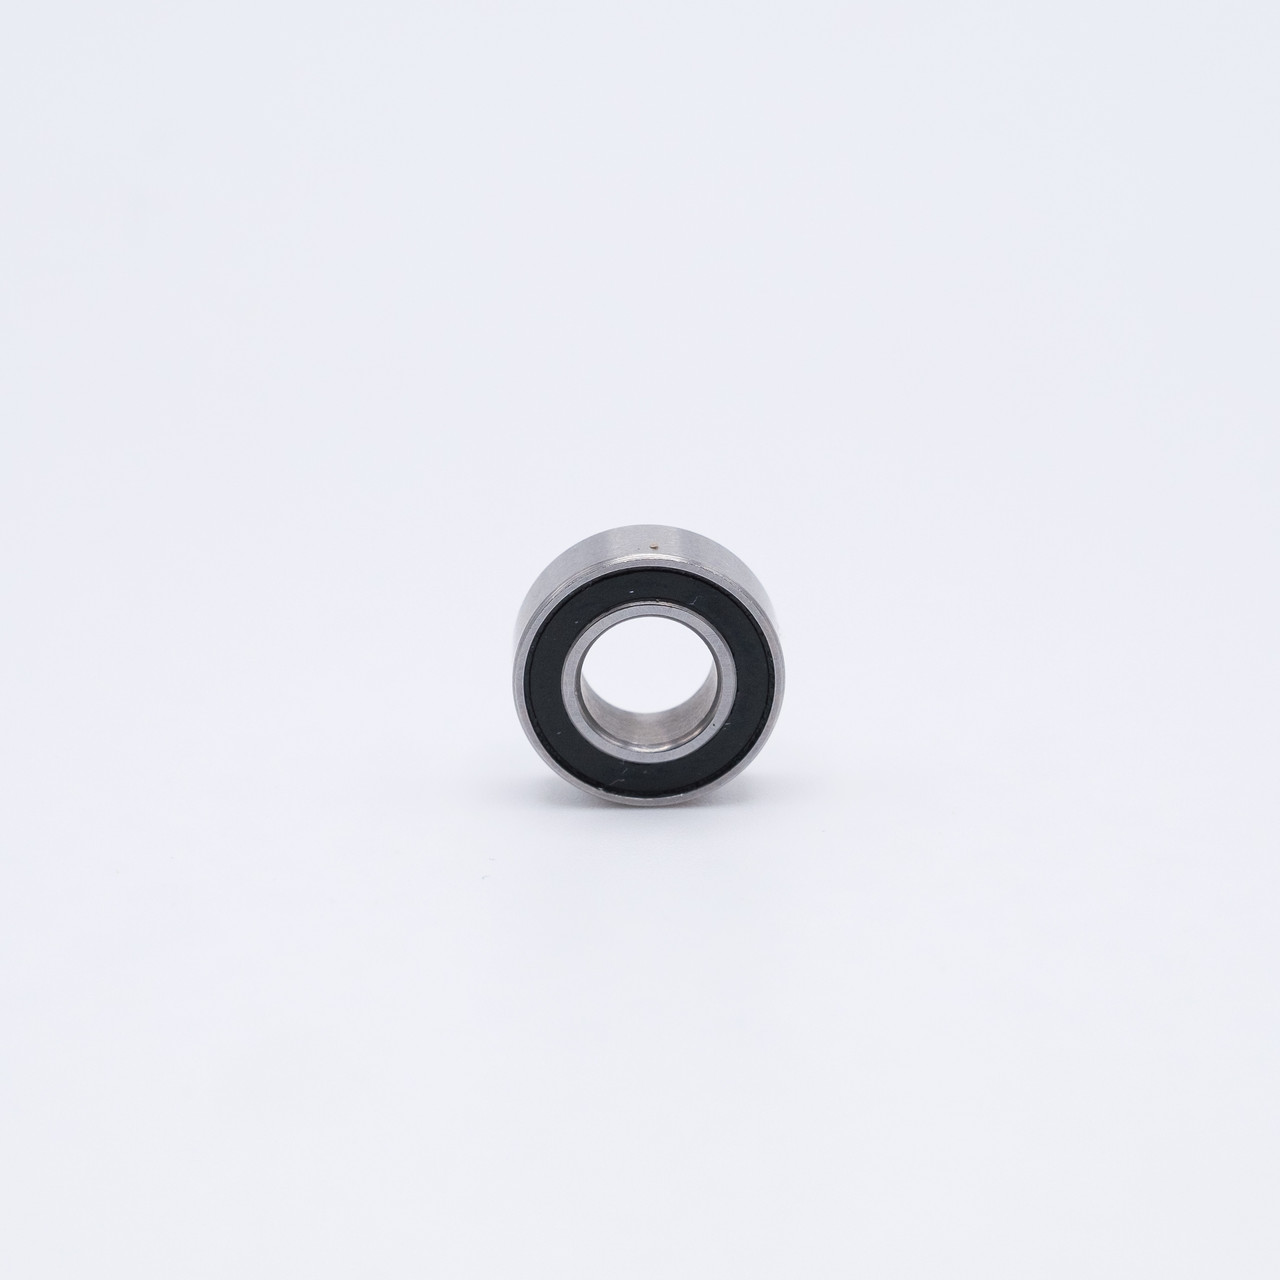 SR4-2RS Stainless Steel Miniature Ball Bearing 1/4x5/8x0.196 Front View